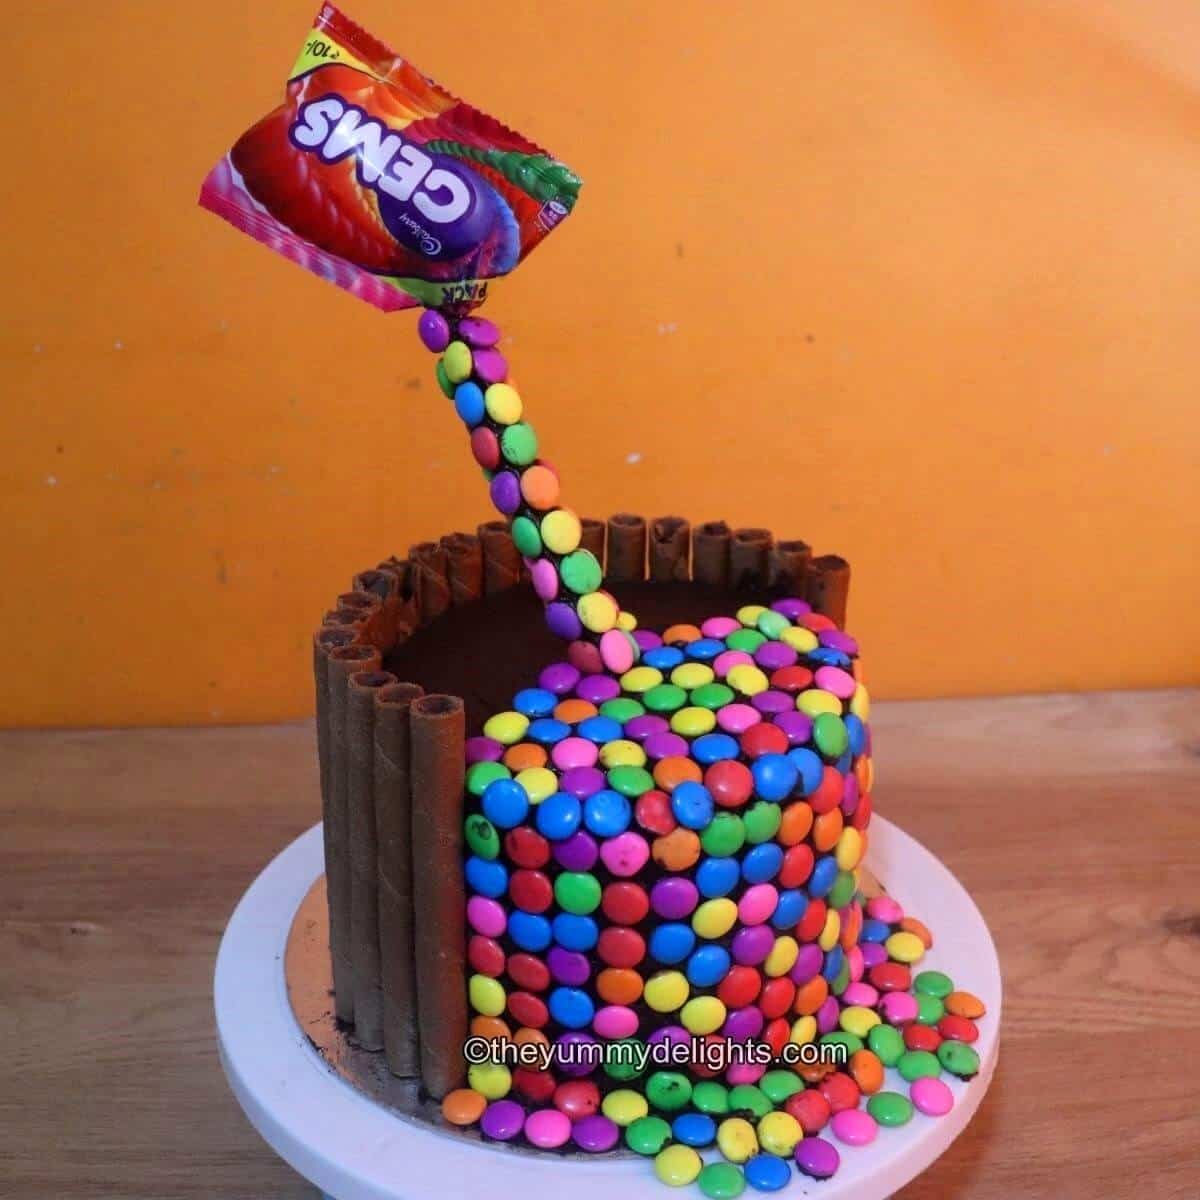 Gravity Defying Cake (Step by step photos + video)